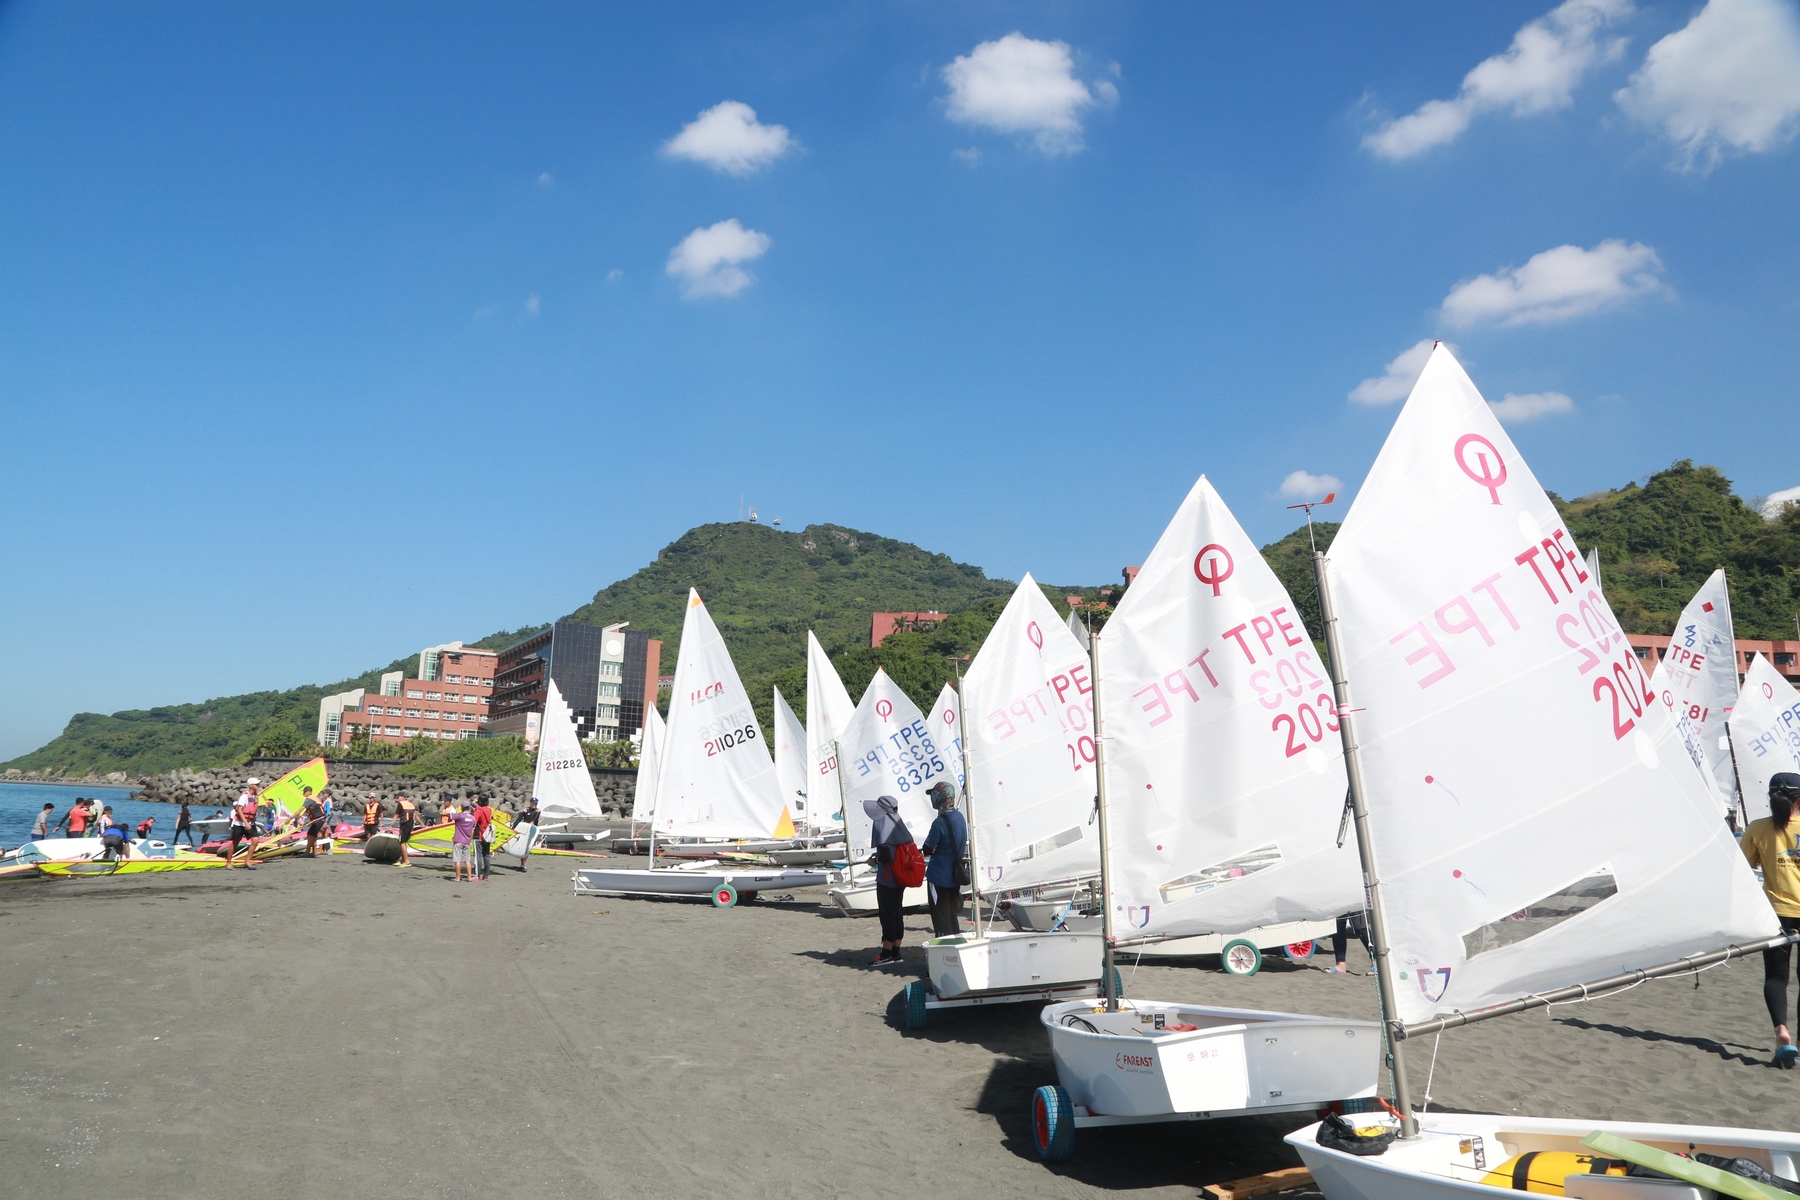 First Taiwan Cup National Sailing Championship at NSYSU to celebrate the opening of Sizihwan Marine Sports Center